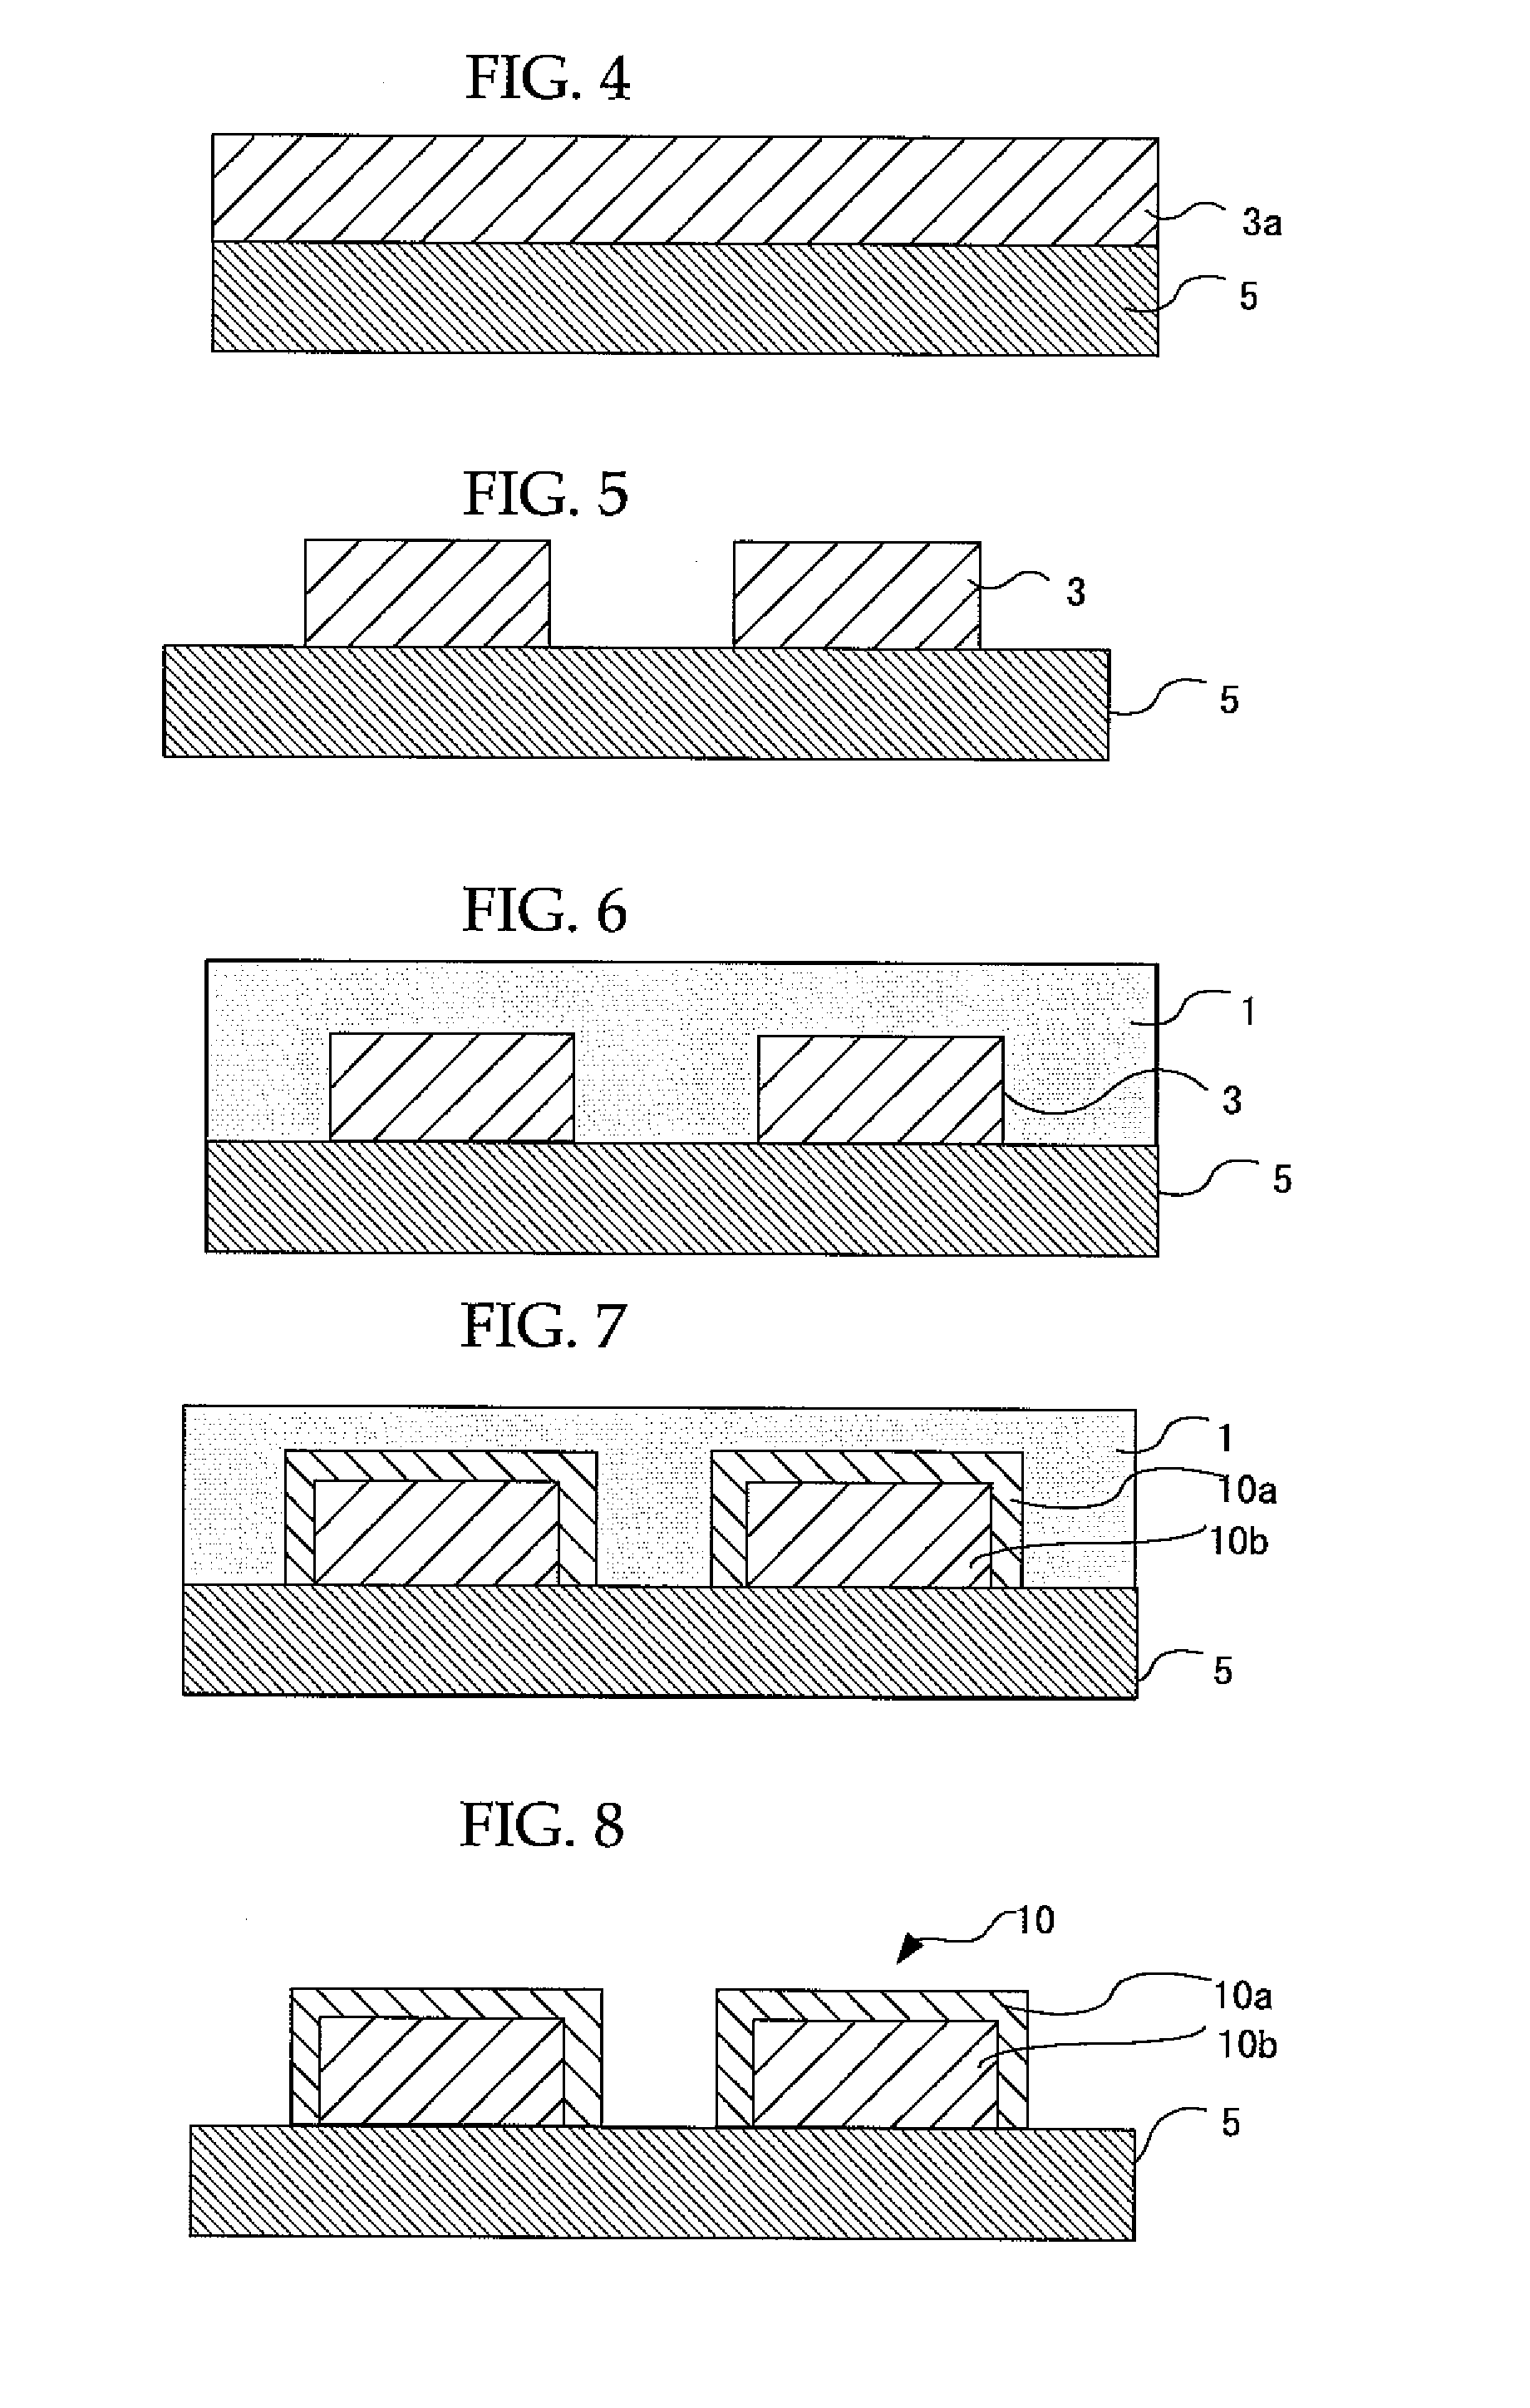 Resist pattern thickening material, method for forming resist pattern, semiconductor device and method for manufacturing the same